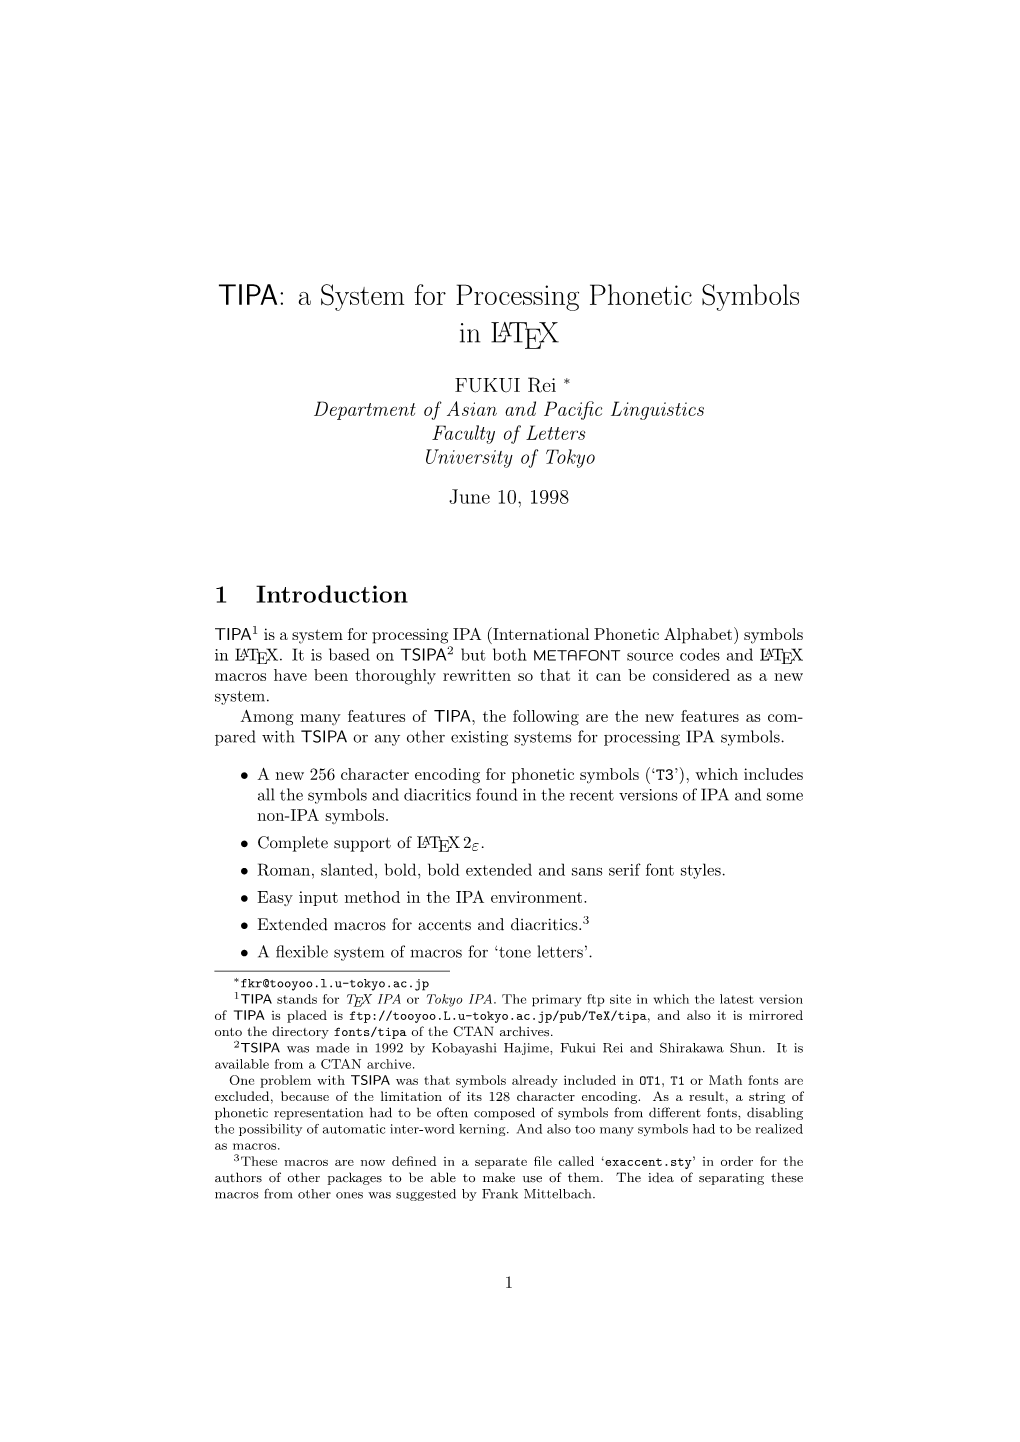 TIPA: a System for Processing Phonetic Symbols in LATEX